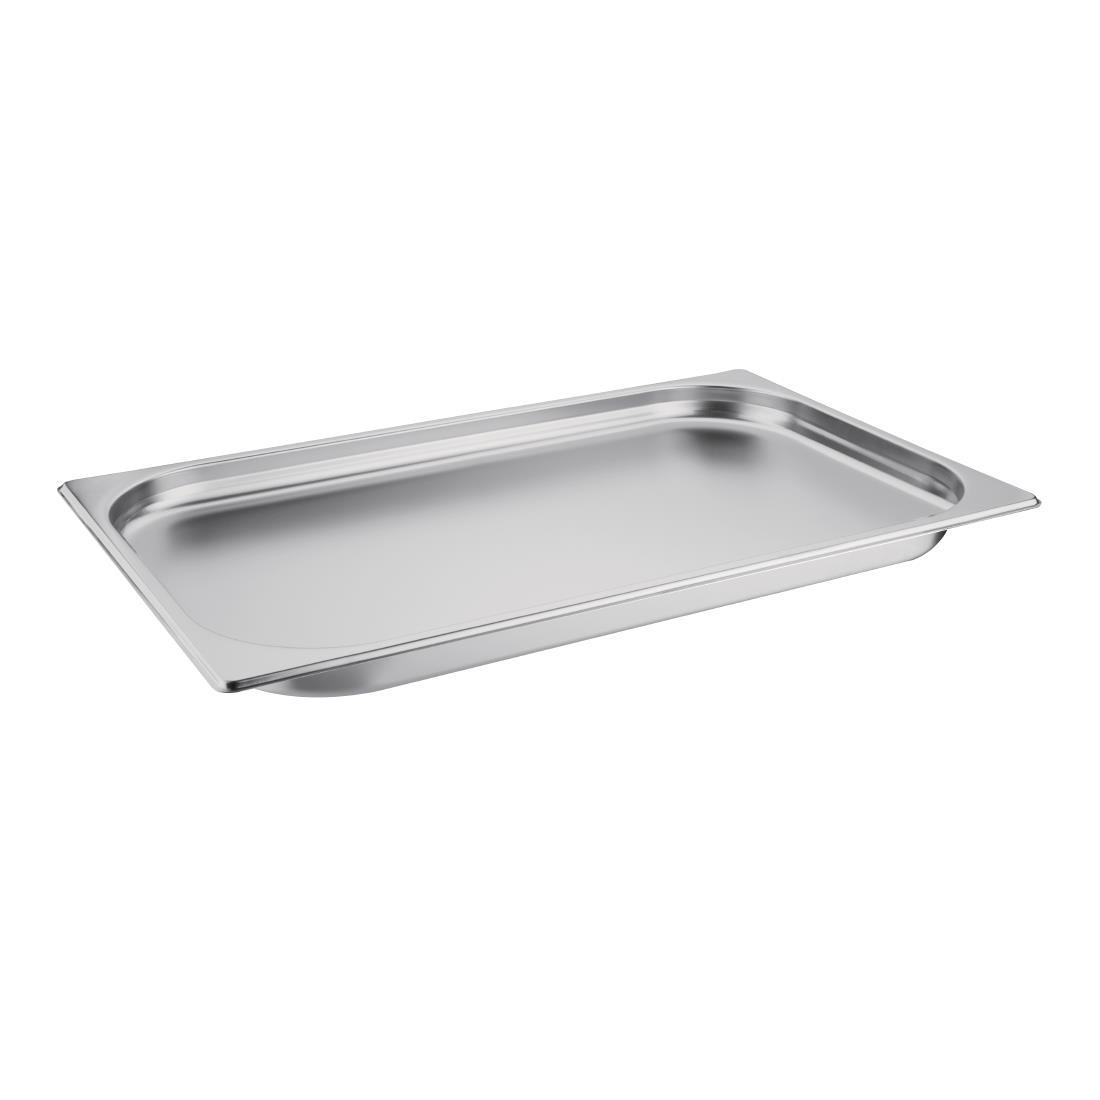 Vogue Stainless Steel 1/1 Gastronorm Pan 20mm - K998  - 1